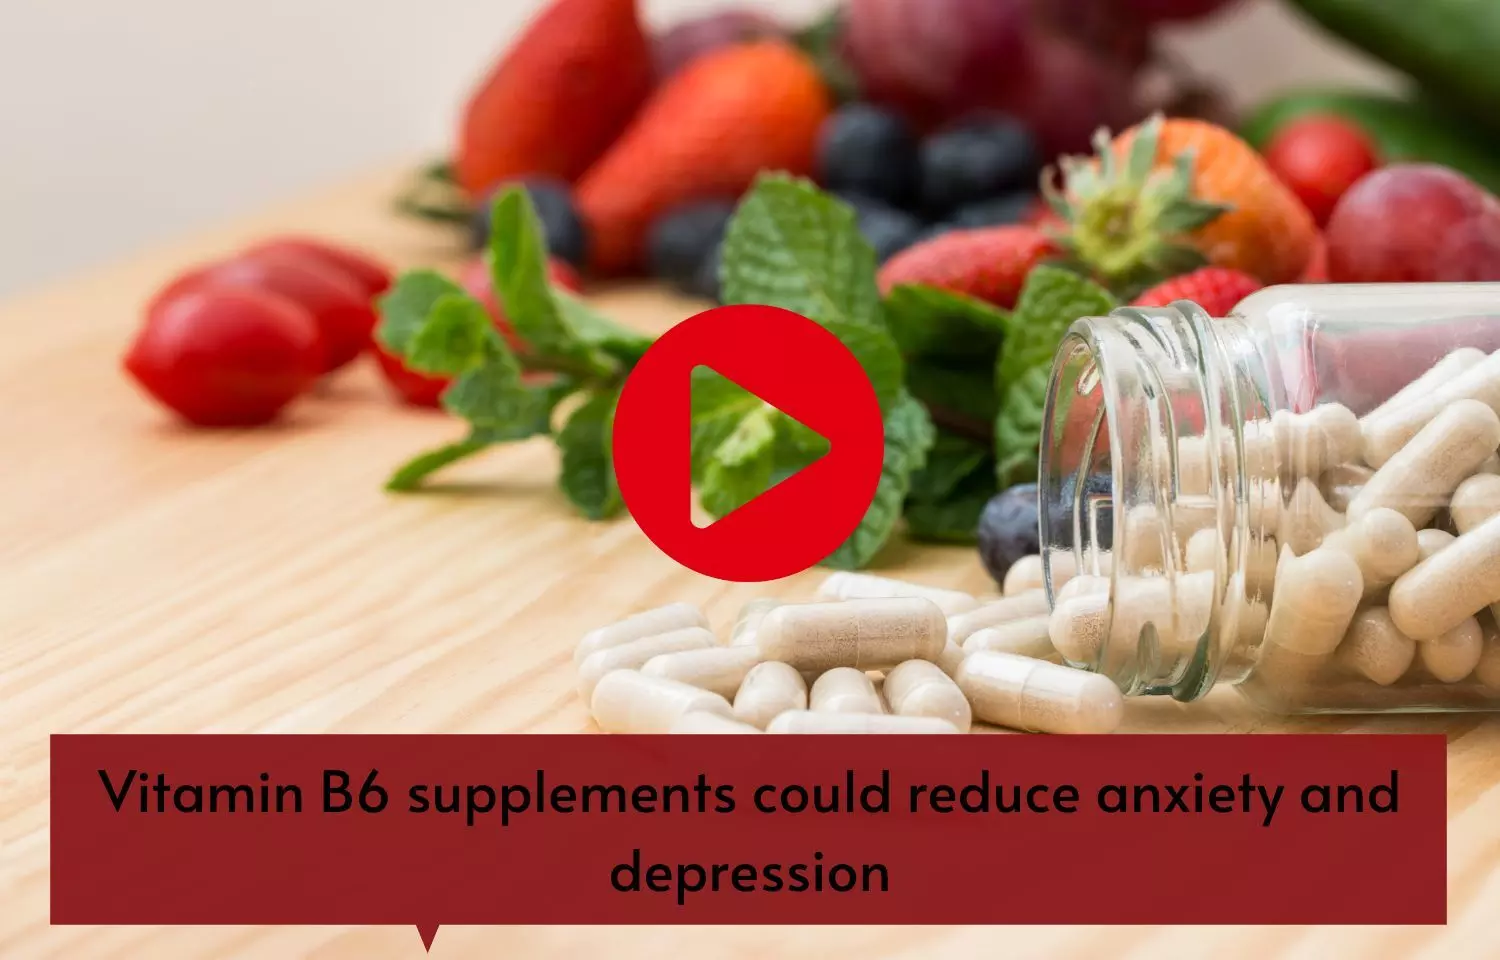 Vitamin B6 supplements could reduce anxiety and depression